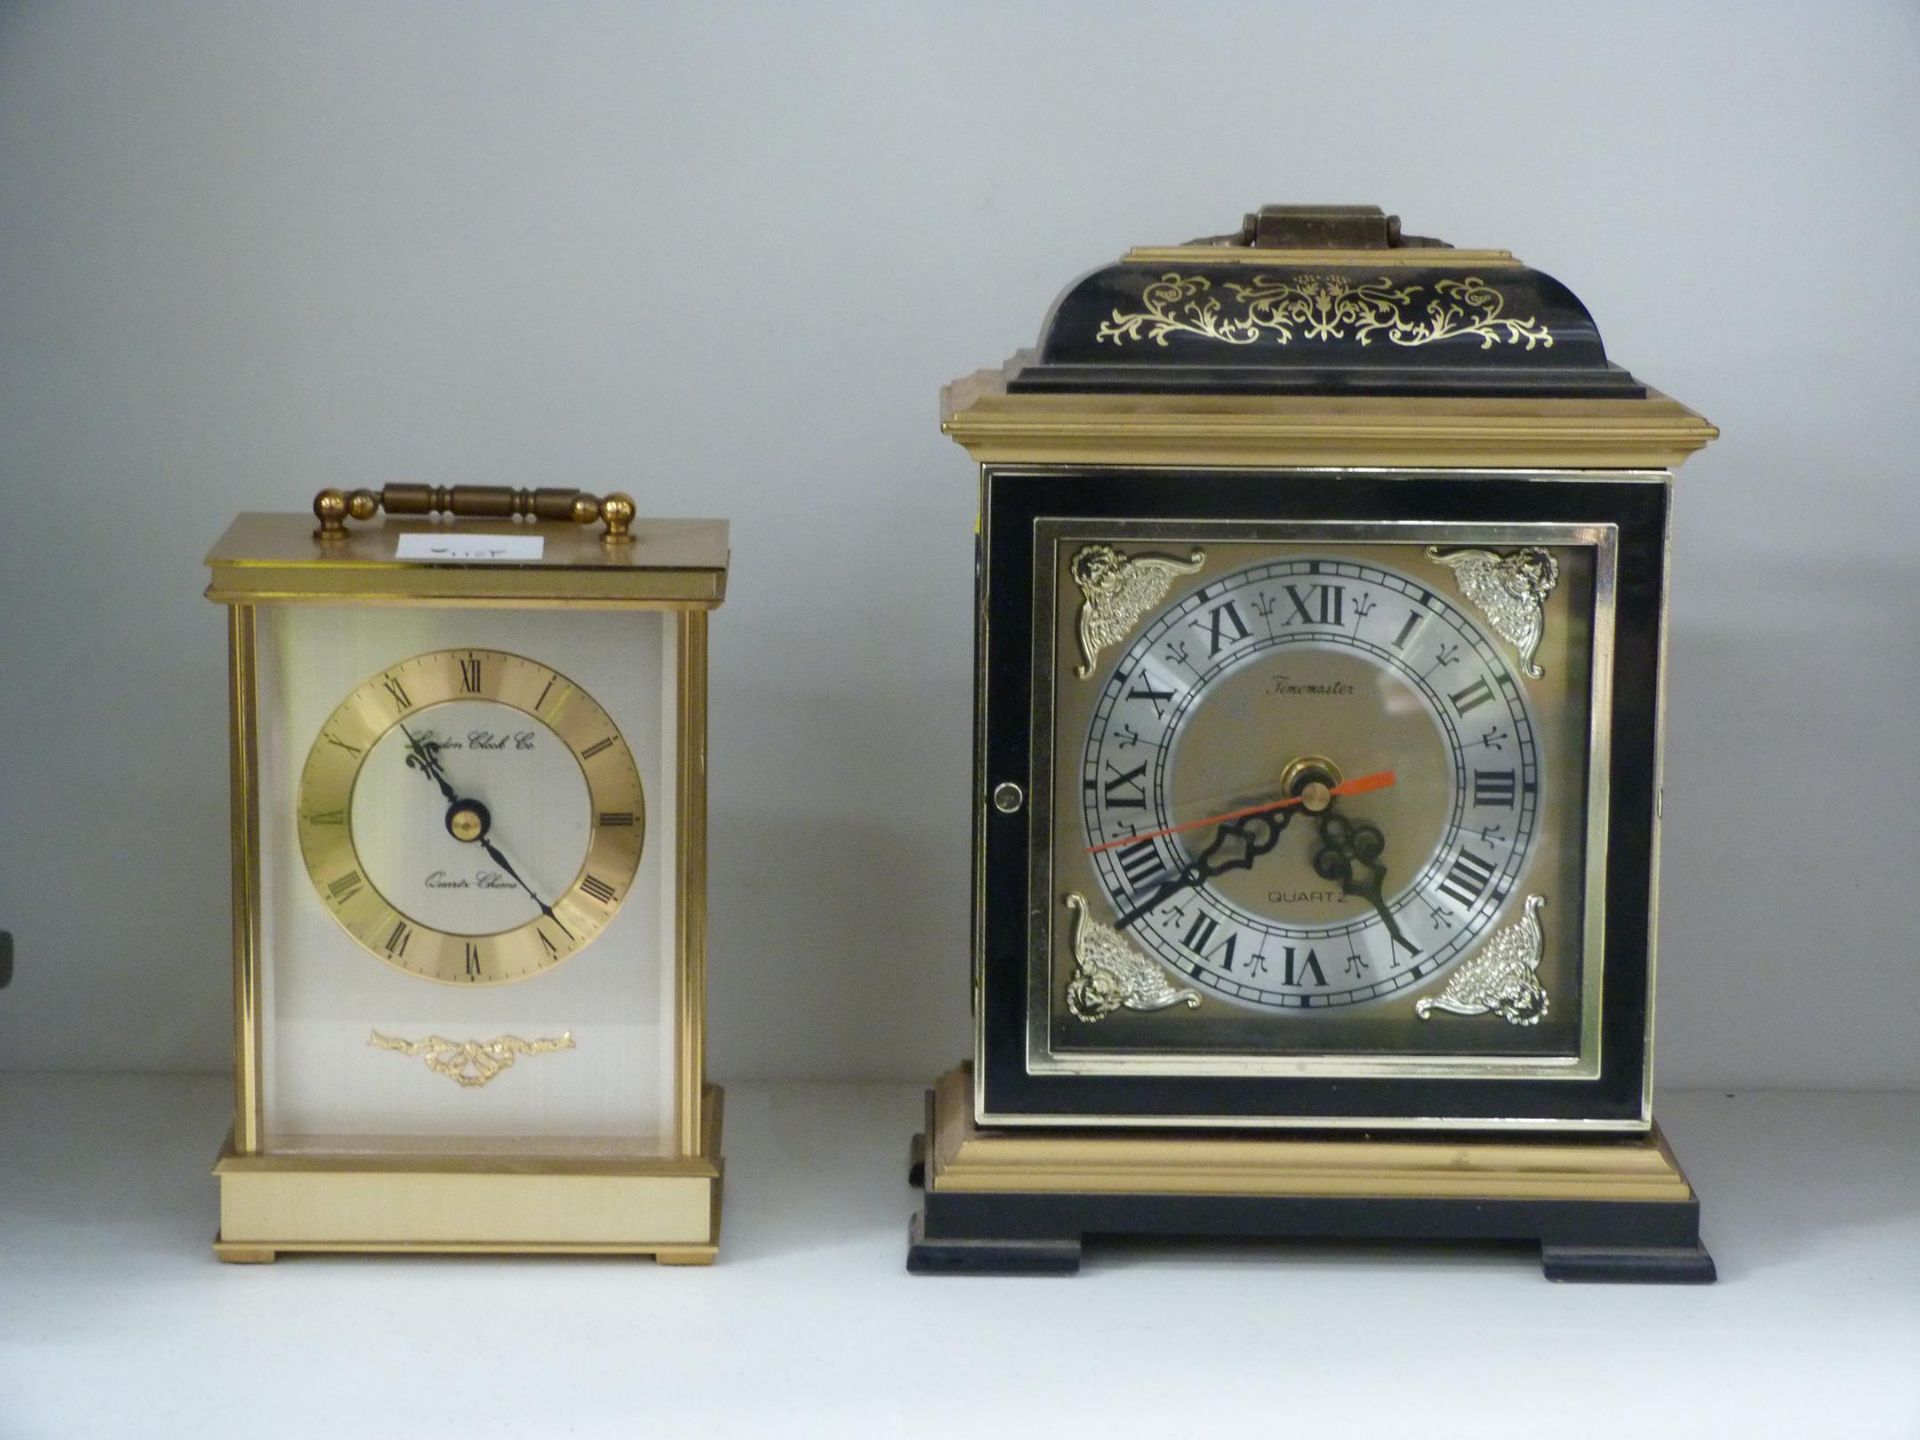 Two Mantle Clocks (Tickmaster & London Clock Co) along with two Wall Clocks (President & Hermle) (4) - Image 4 of 4